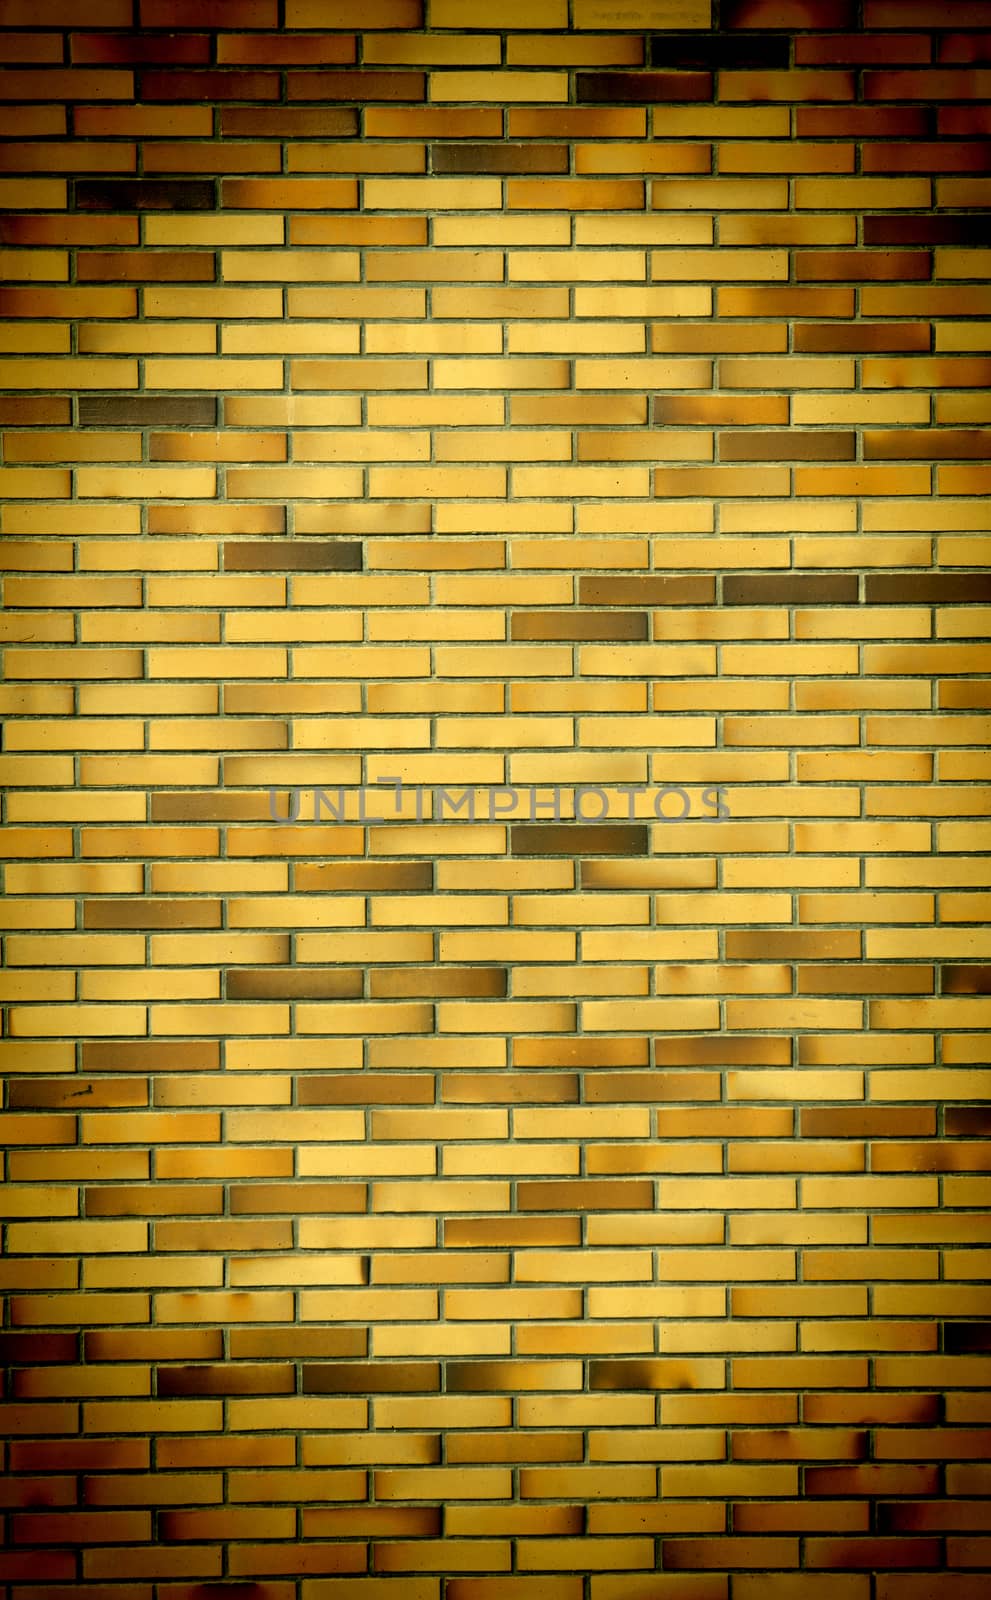 brick wall background with vignette corners